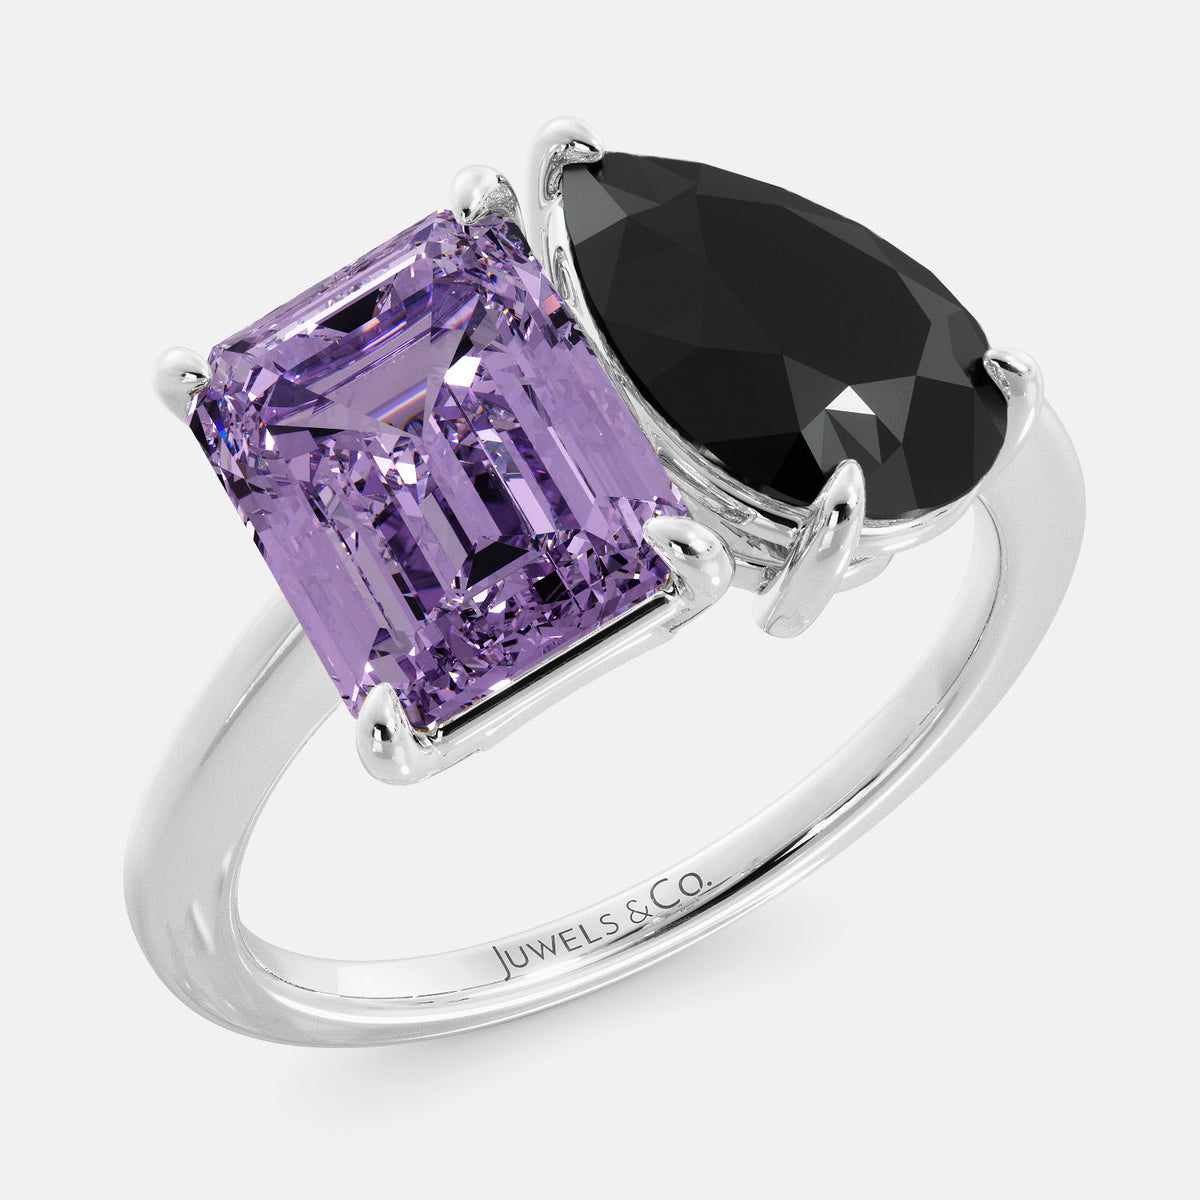 What are the uses of amethyst? - Quora